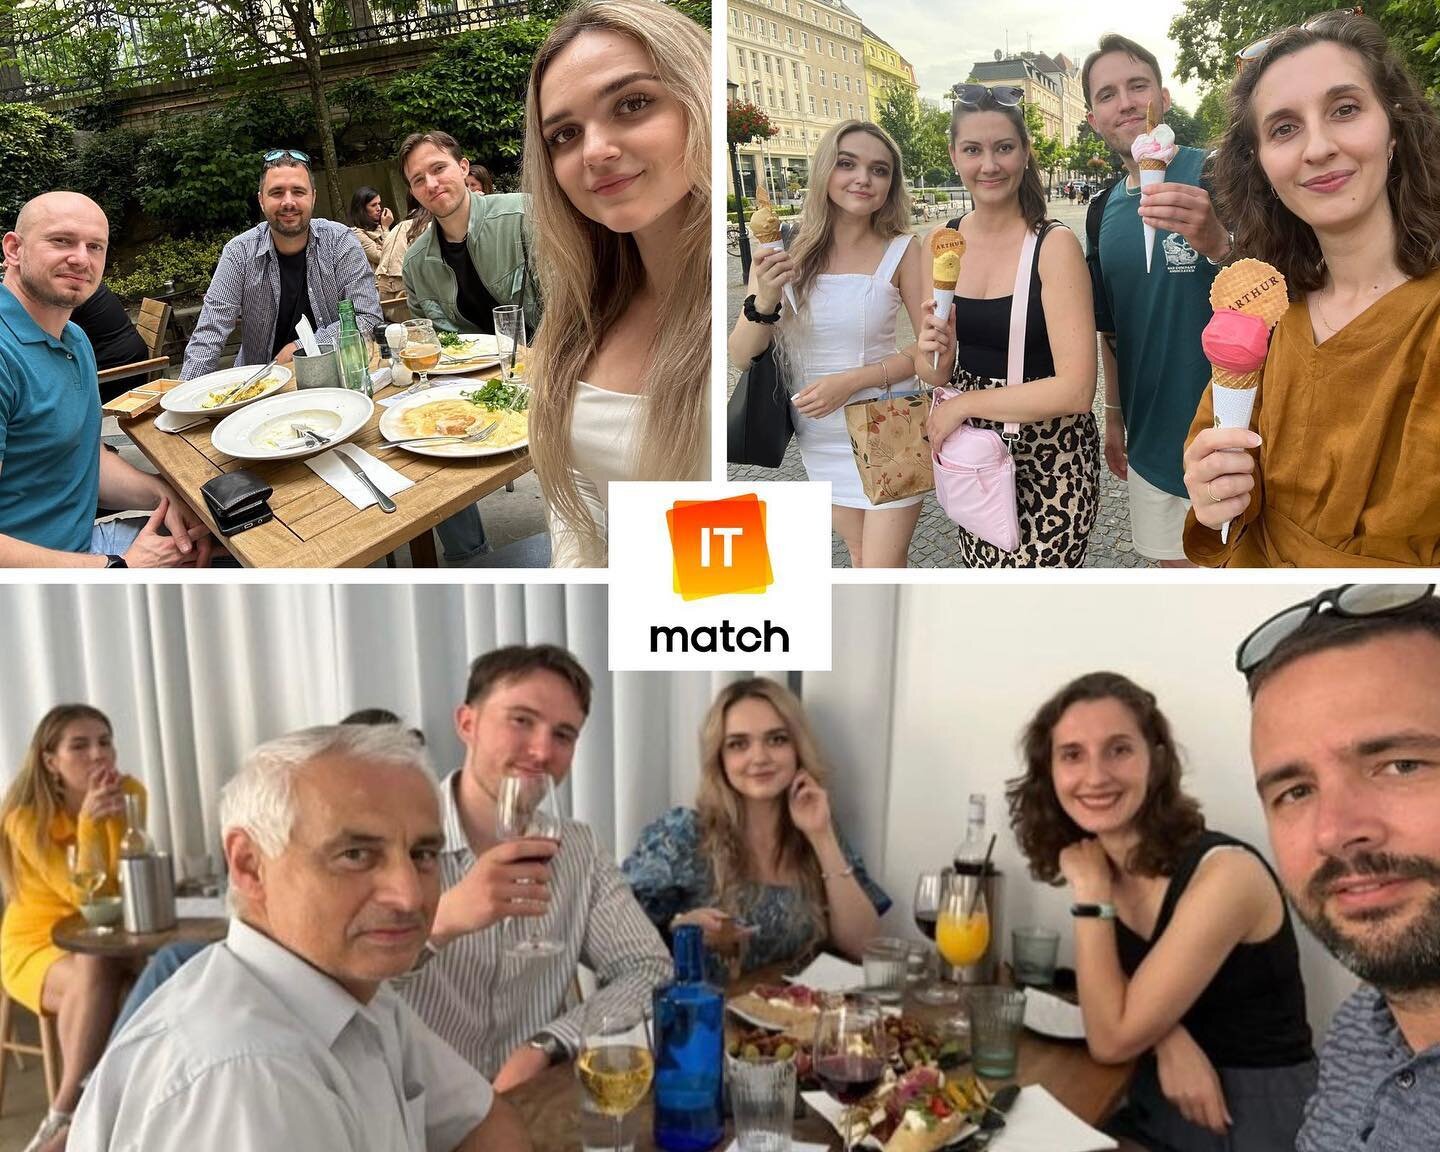 While work relationships are important, nurturing friendships outside of the workplace is equally valuable.
.
#teambuilding #itmatch #itrecruitment #itstaffing #informationtechnology #IT #team